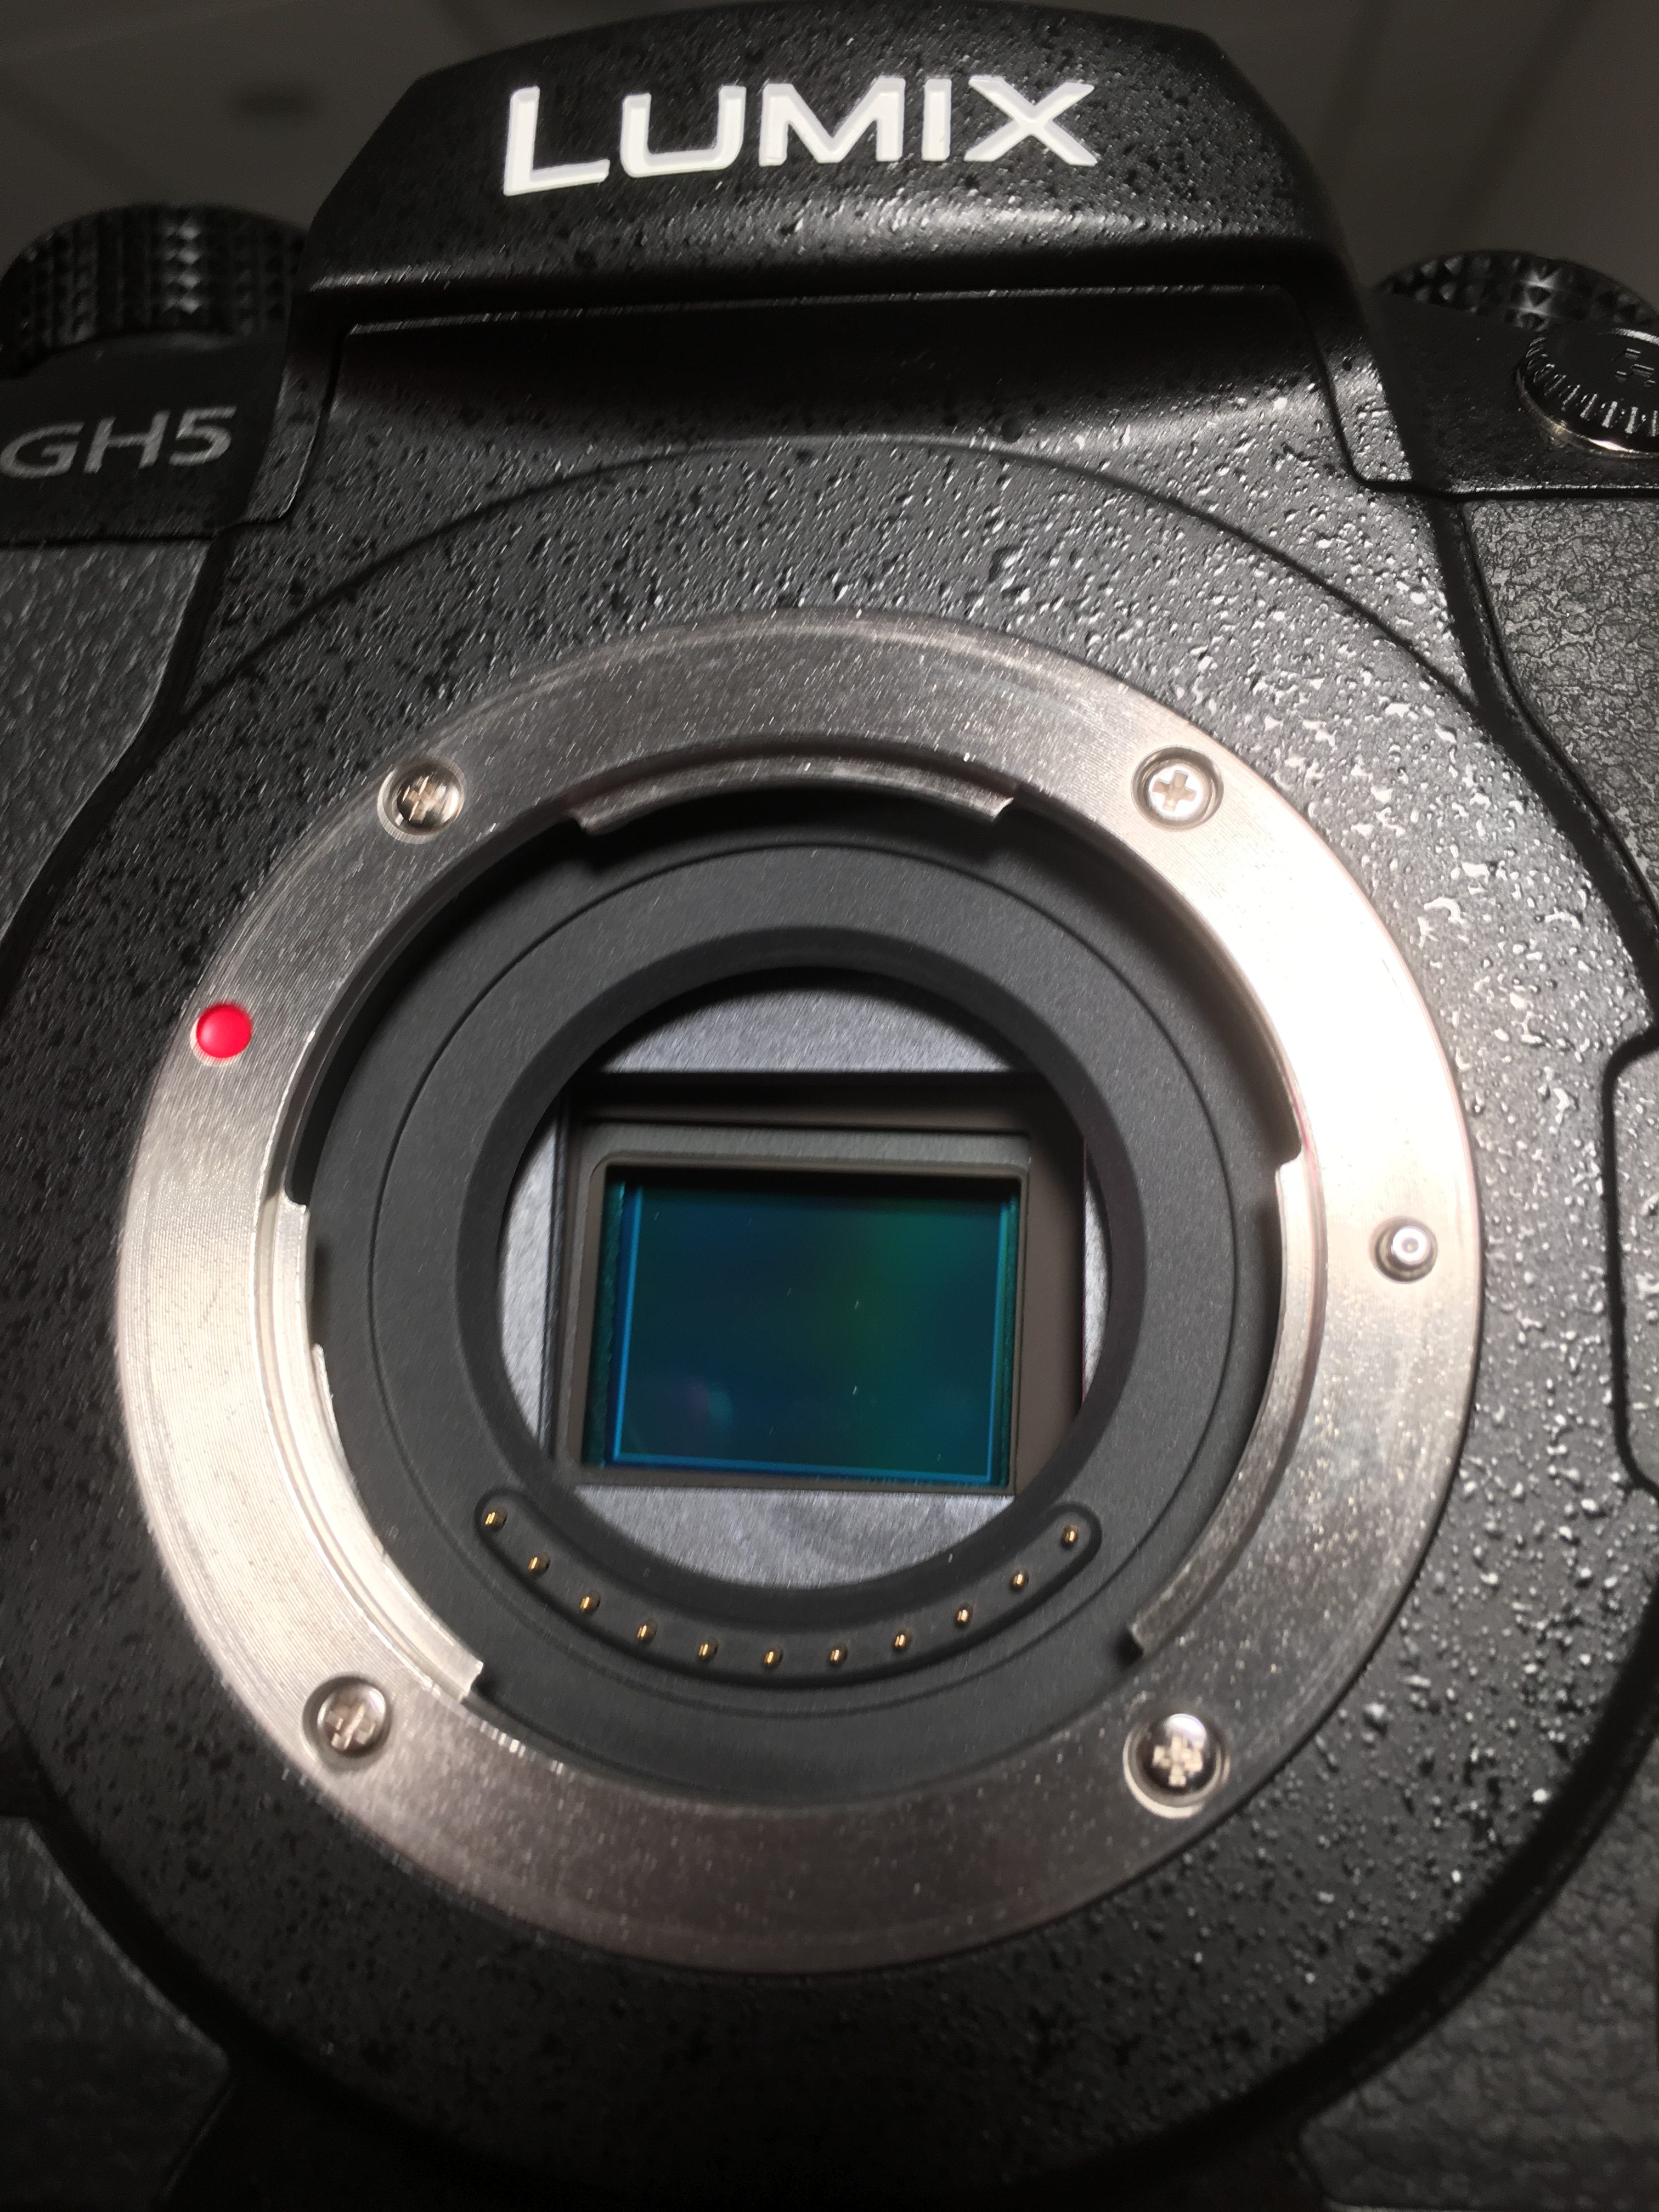 Complex Rechtsaf Kneden Panasonic GH5 at CES 2017: Internal 10-bit 422 4K recording at 400 Mbps,  and HD up to 180fps - Newsshooter